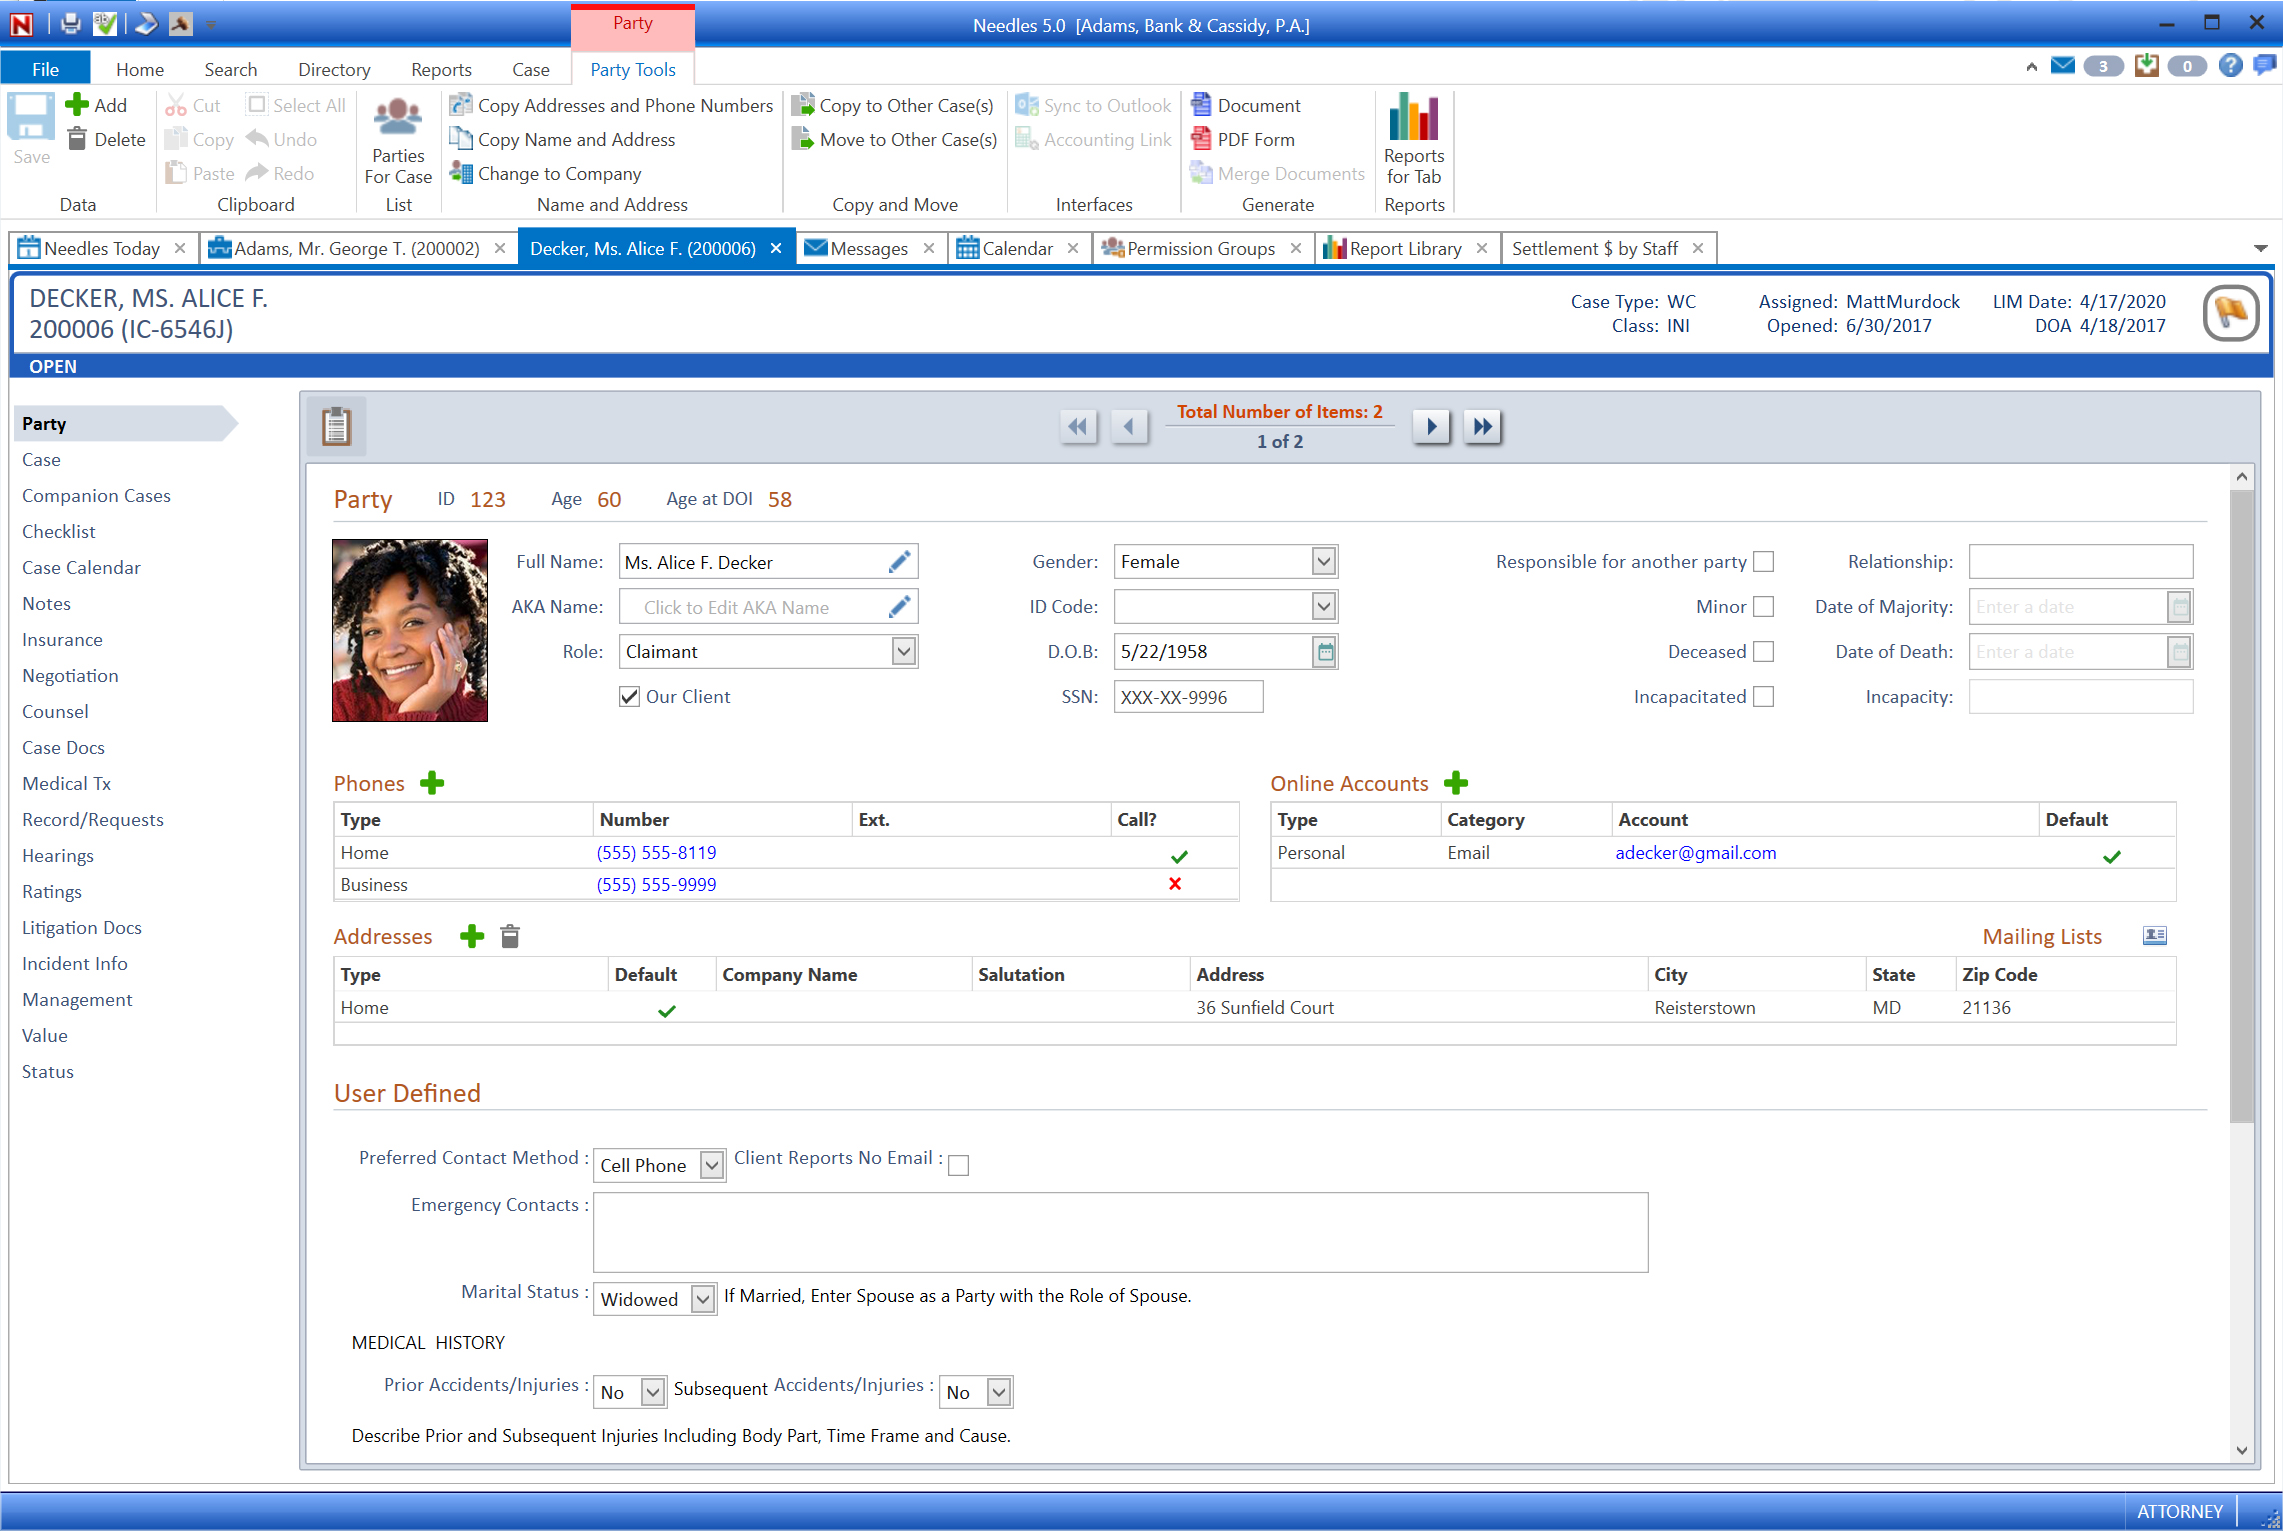 Free Trial Needles Case Management Software